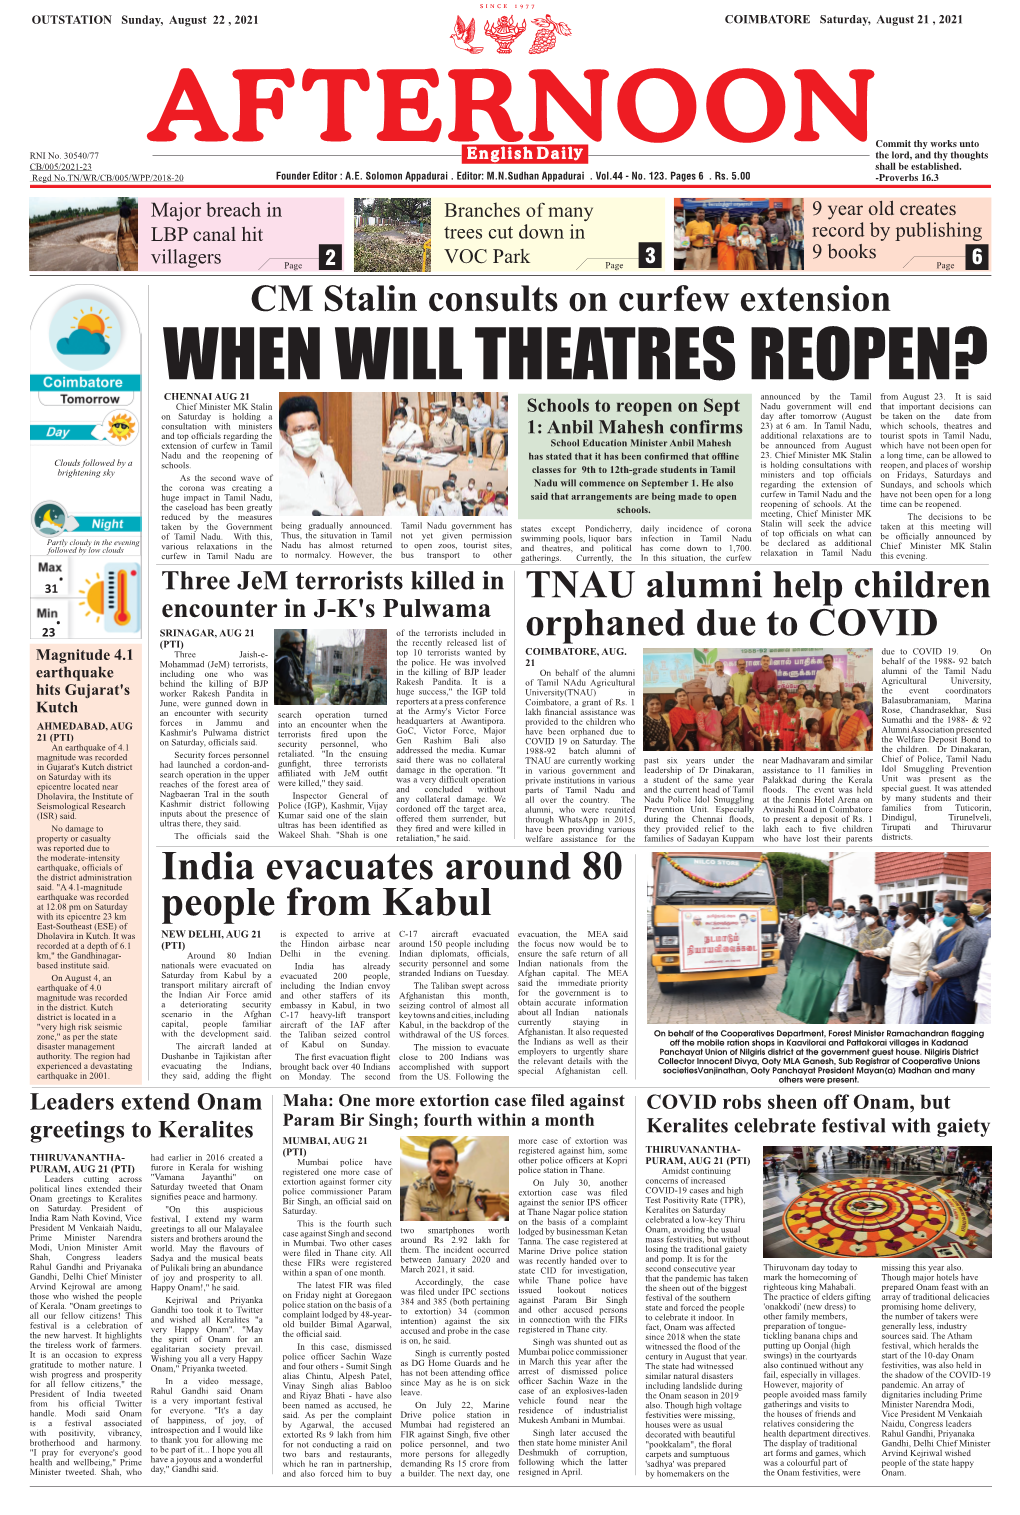 WHEN WILL THEATRES REOPEN? CHENNAI AUG 21 Announced by the Tamil from August 23